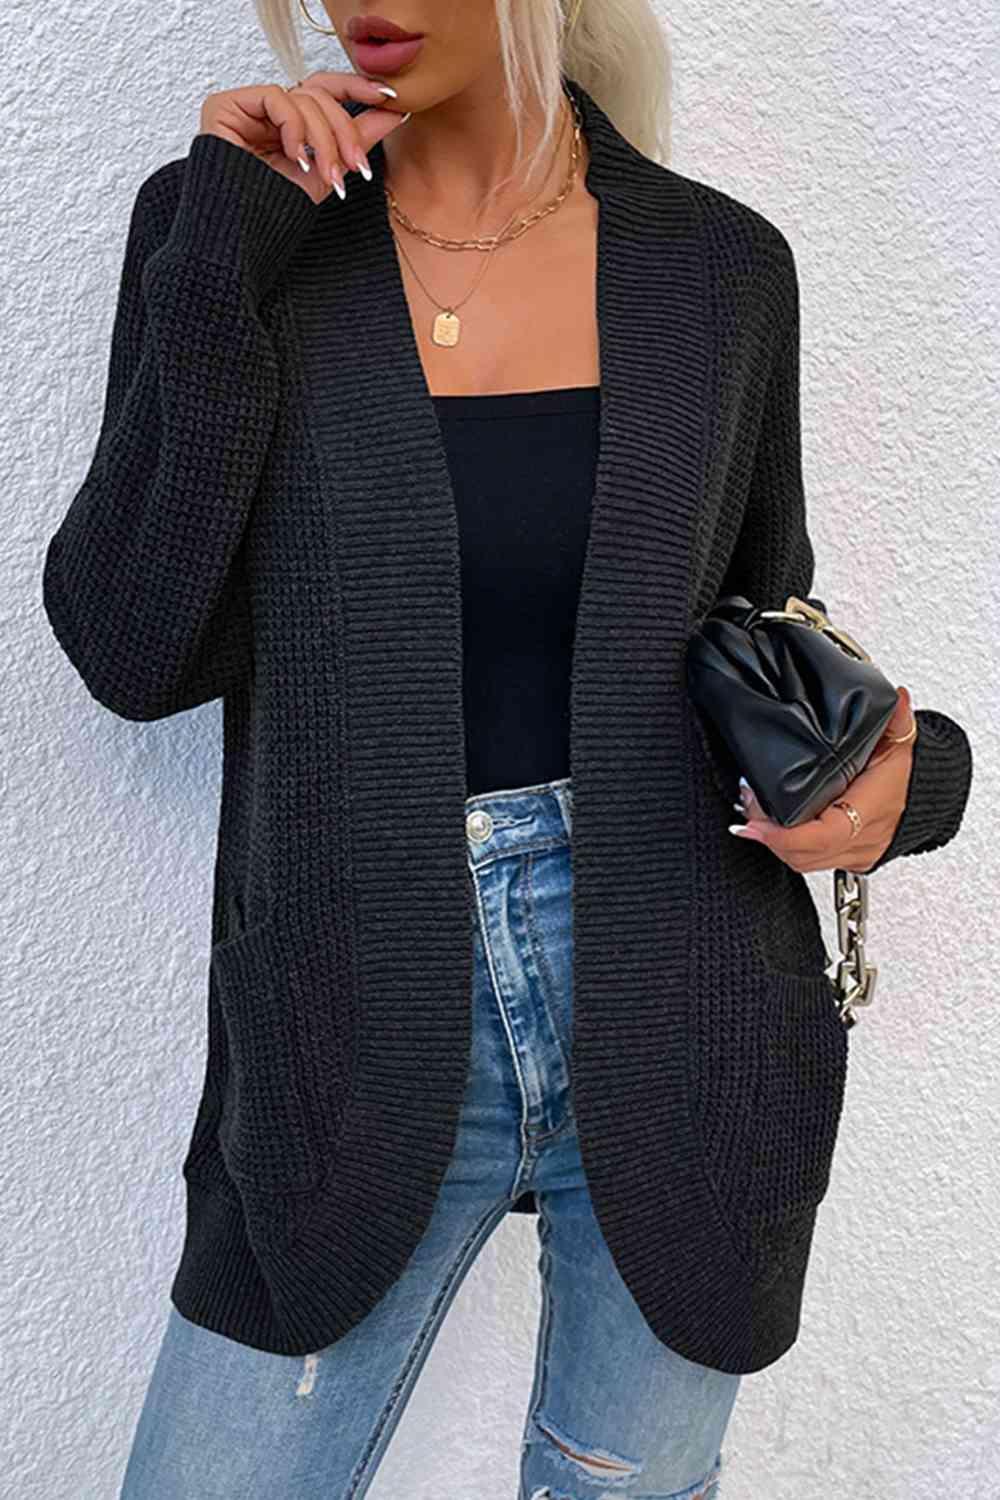 a woman wearing a black cardigan sweater and ripped jeans